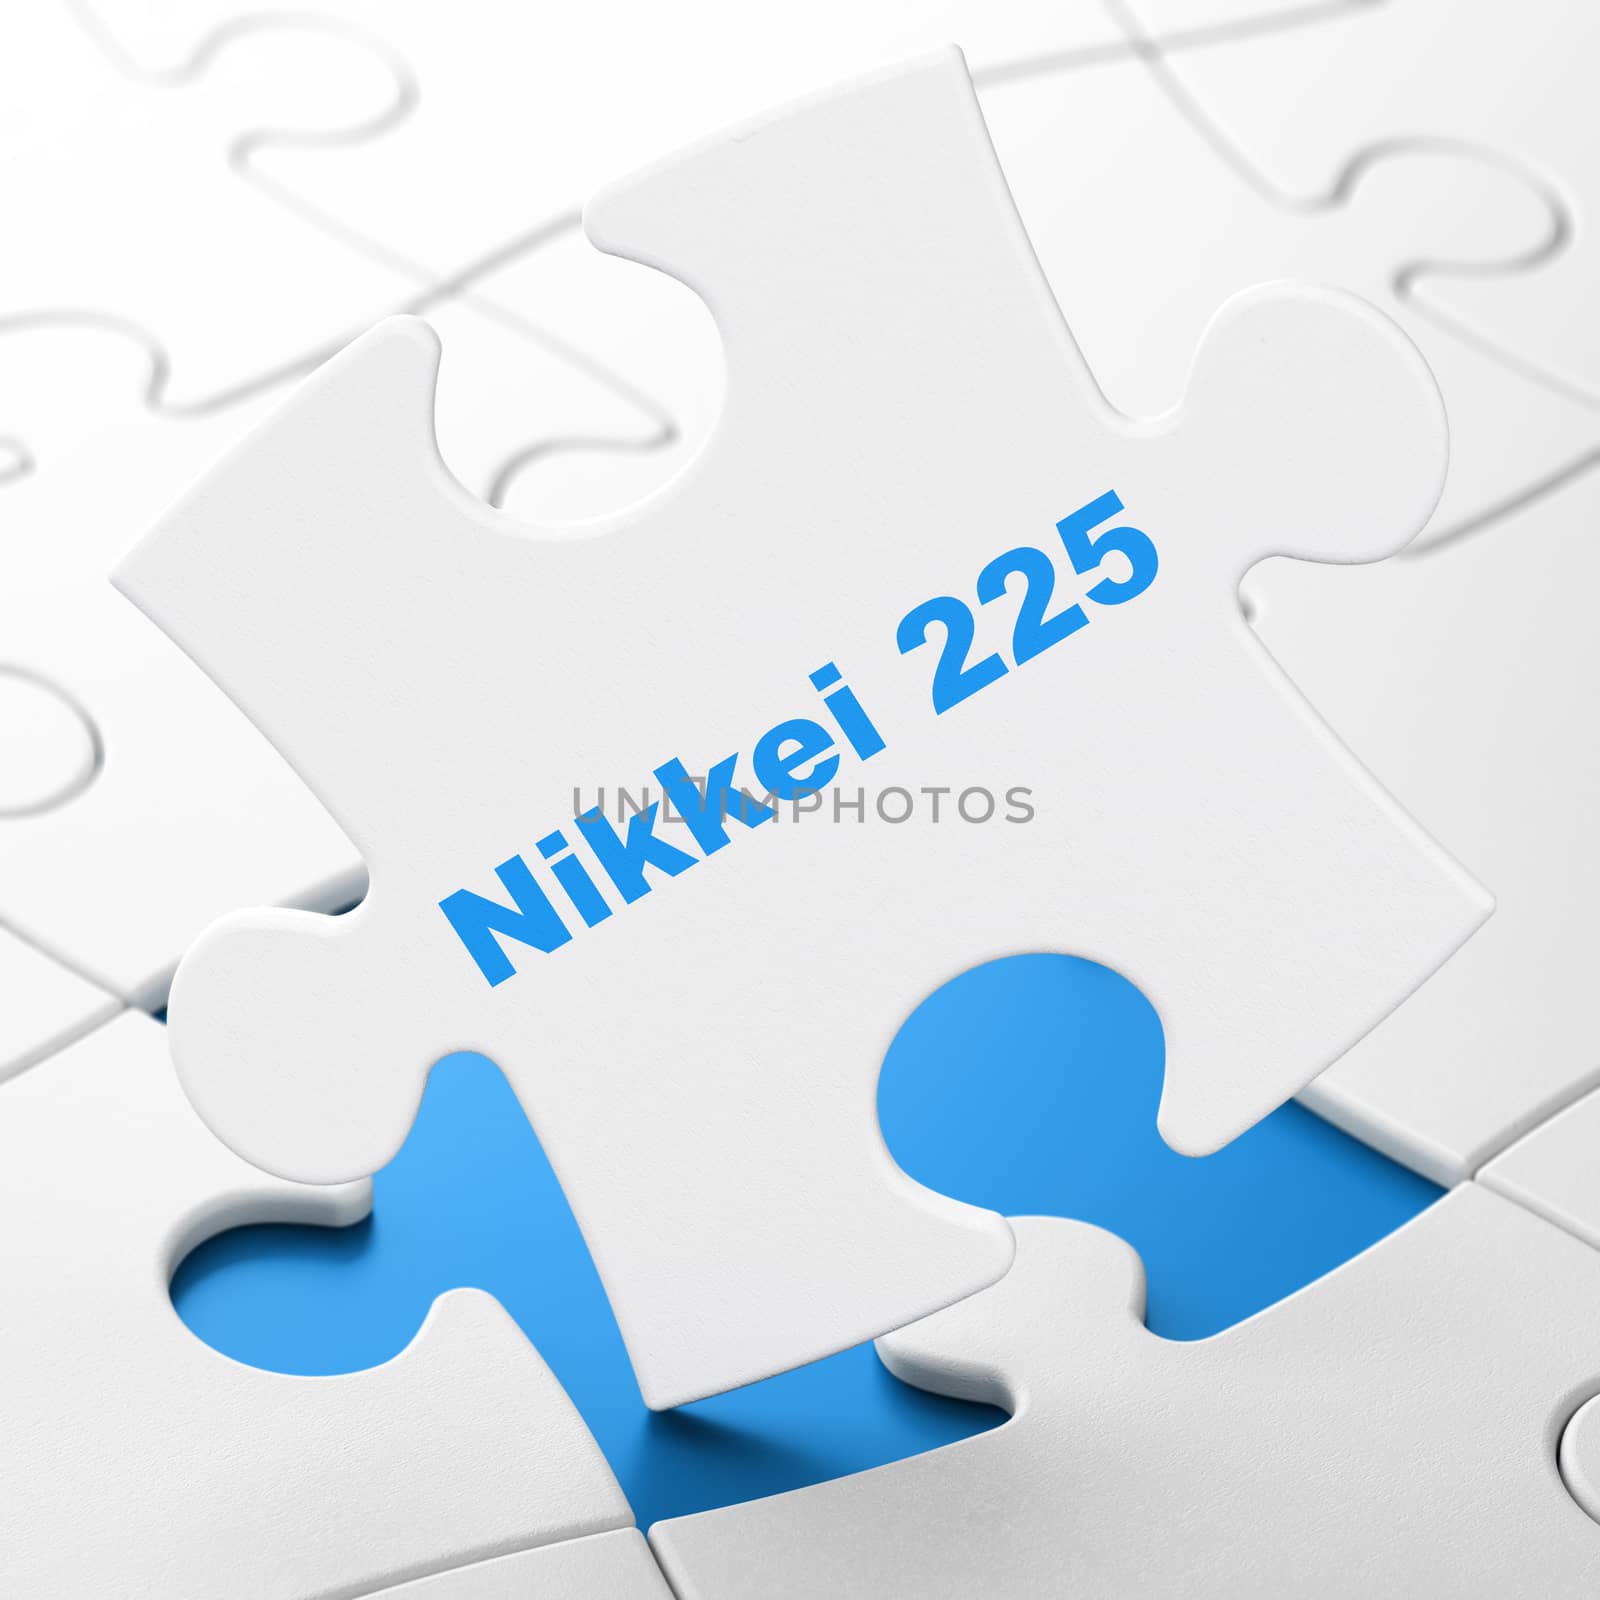 Stock market indexes concept: Nikkei 225 on White puzzle pieces background, 3D rendering